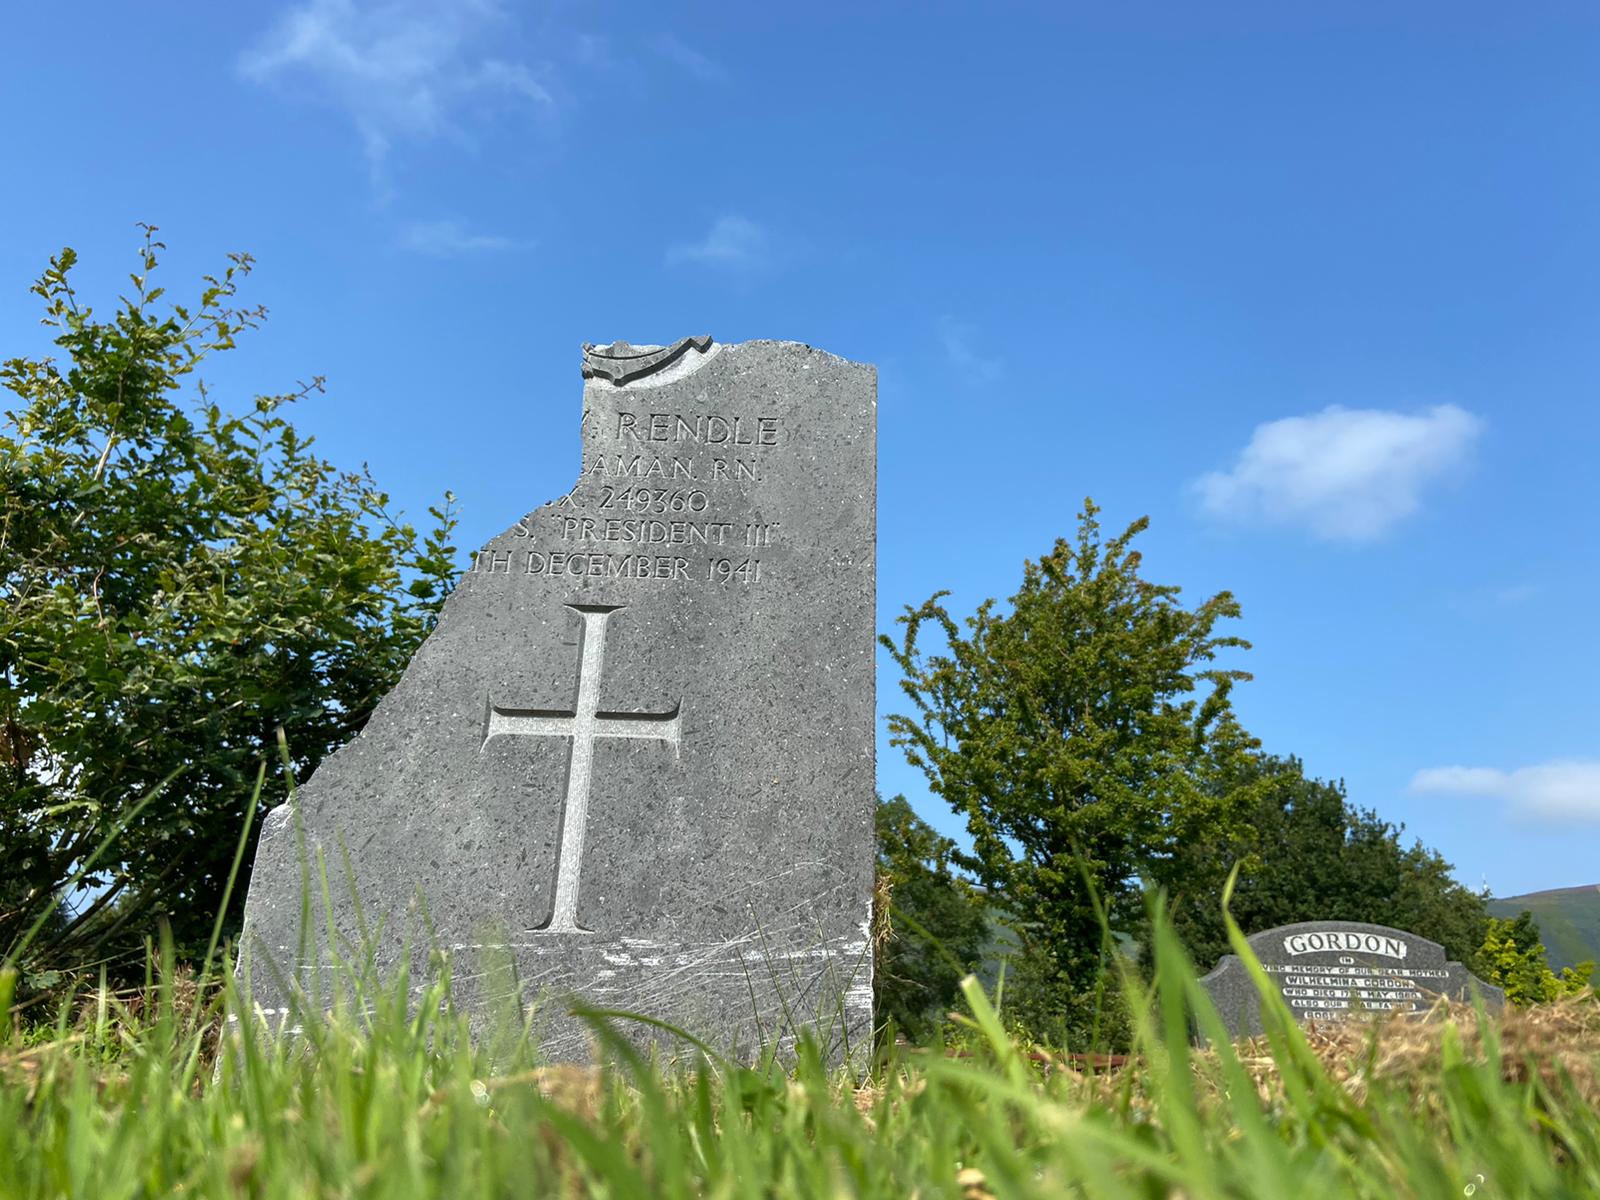 VANDALISM: Up to 20 war graves were damaged at the City Cemetery